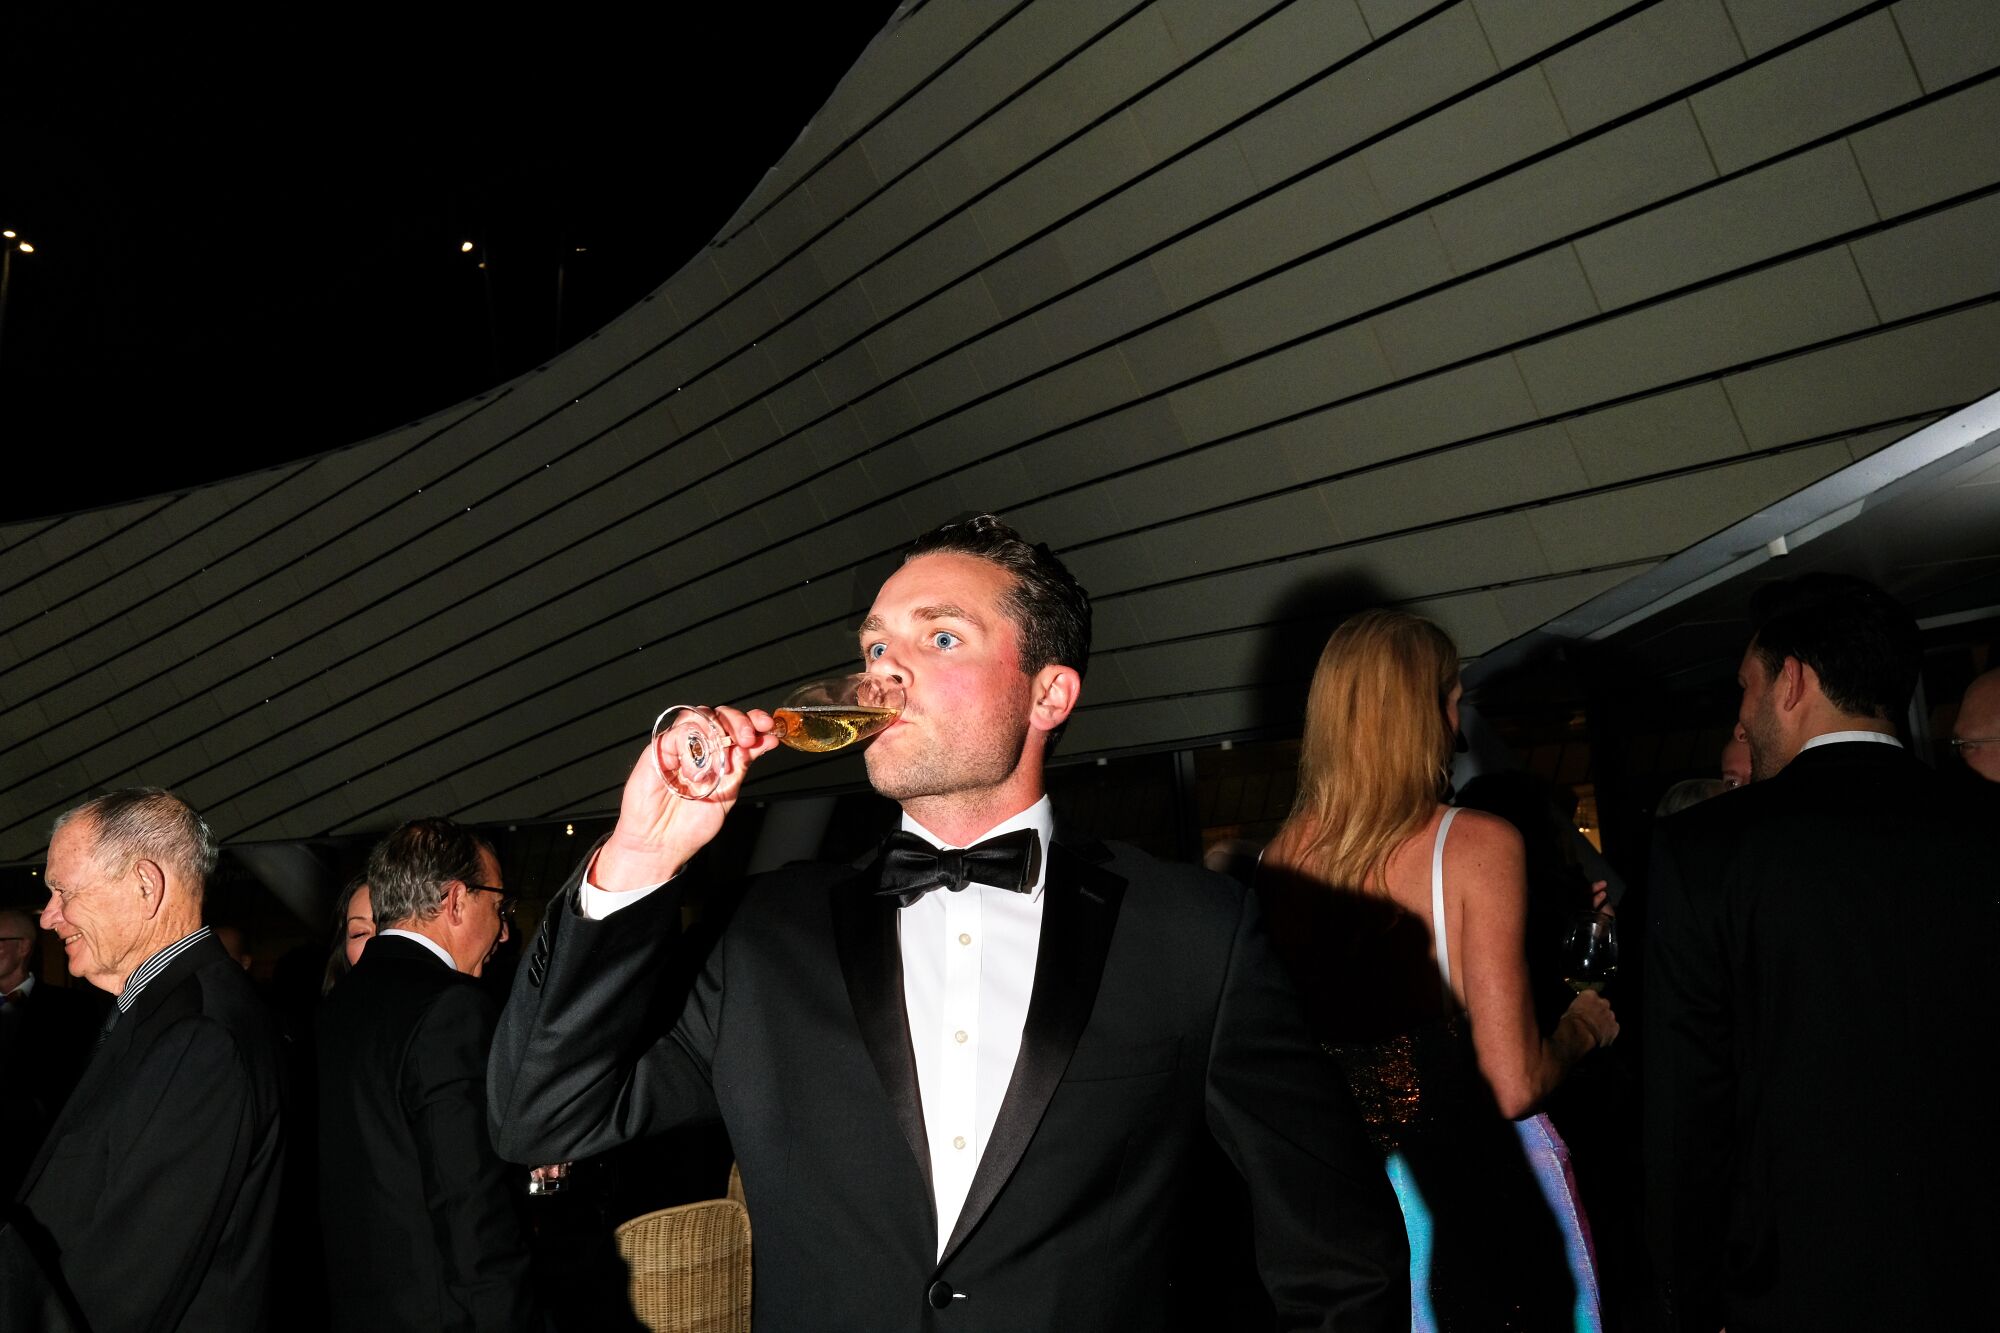 A man drinks champagne.